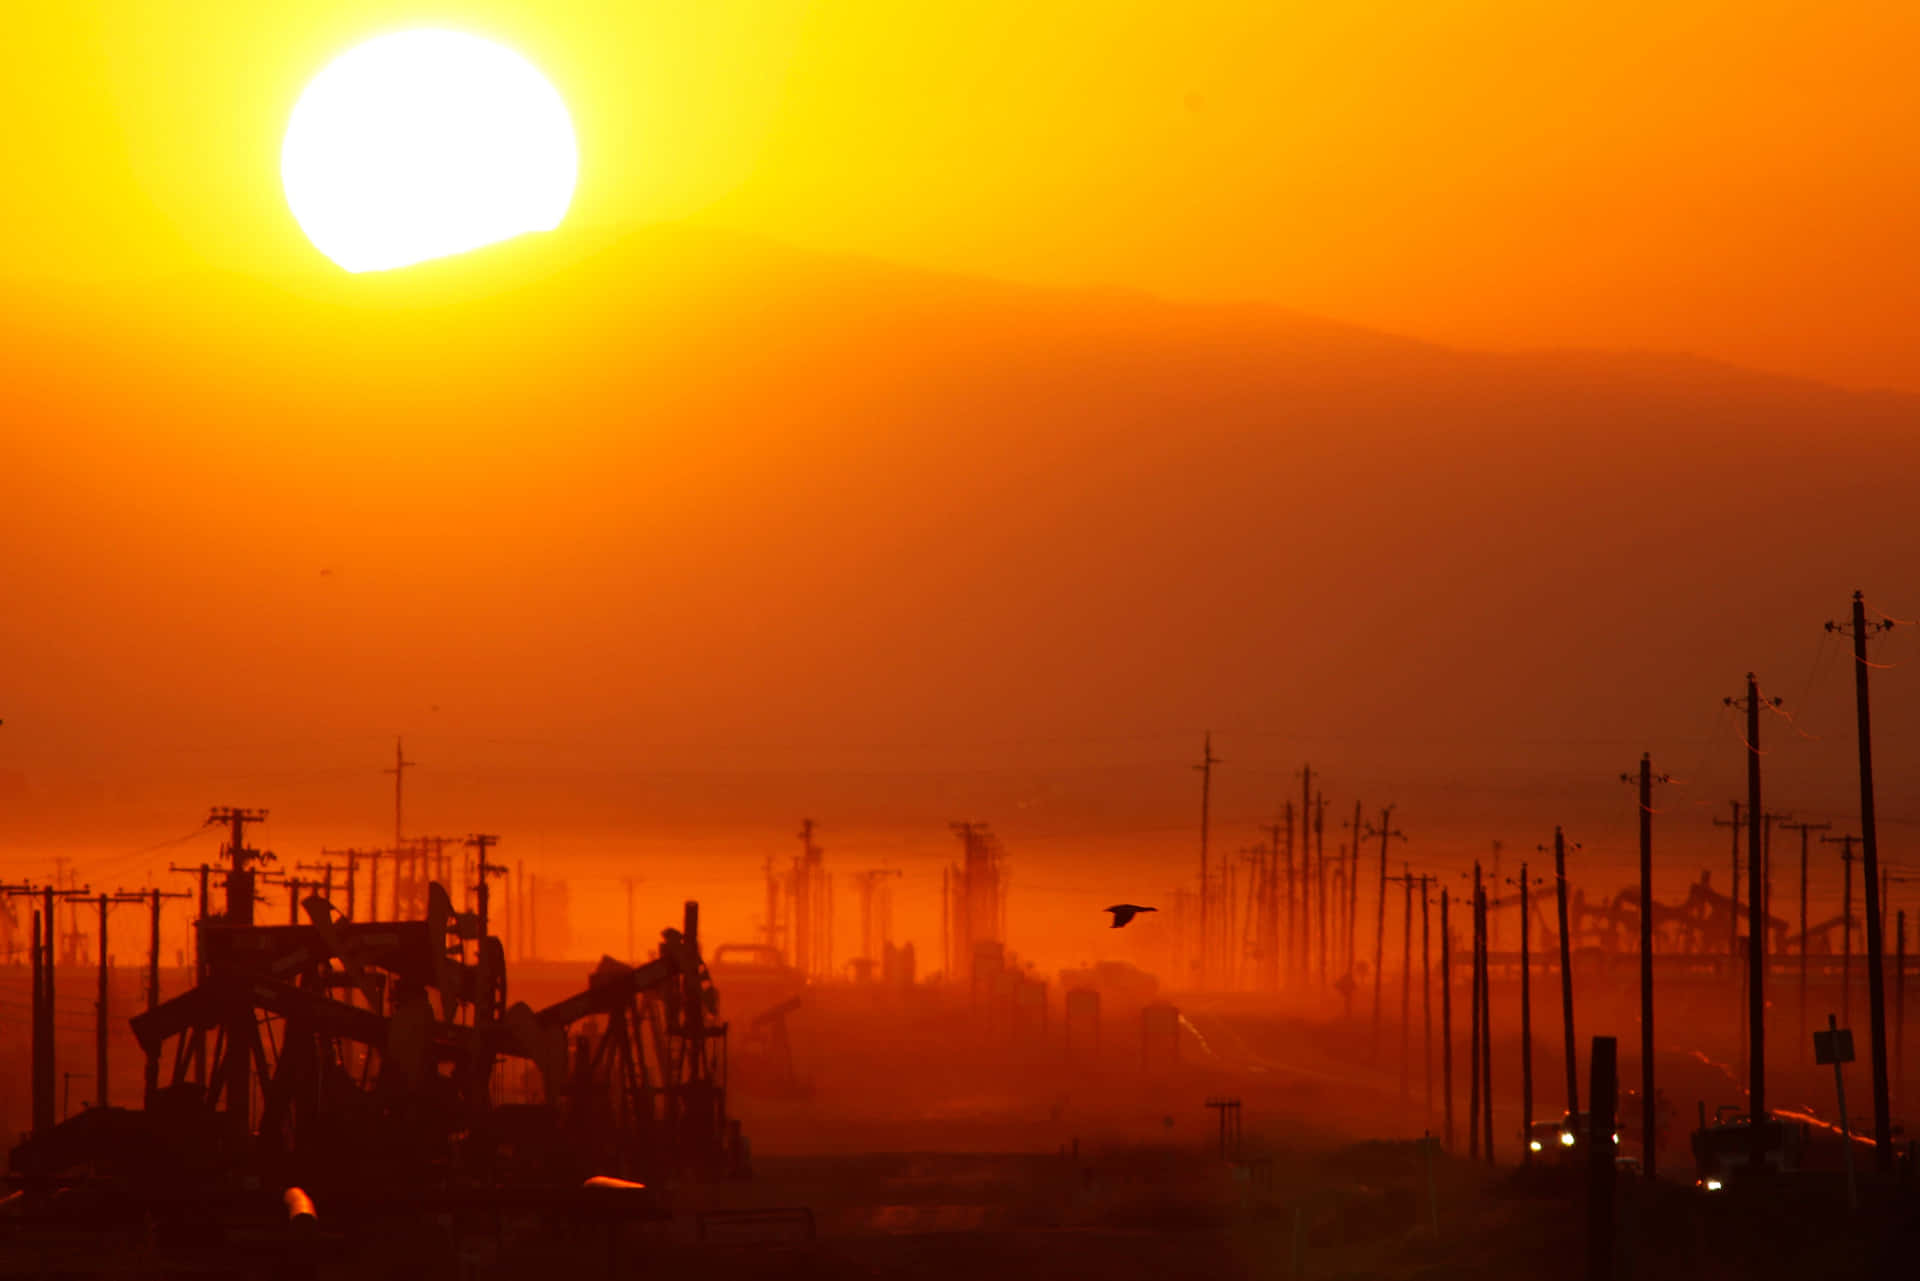 A Sunset Over A Field With Oil Pumps